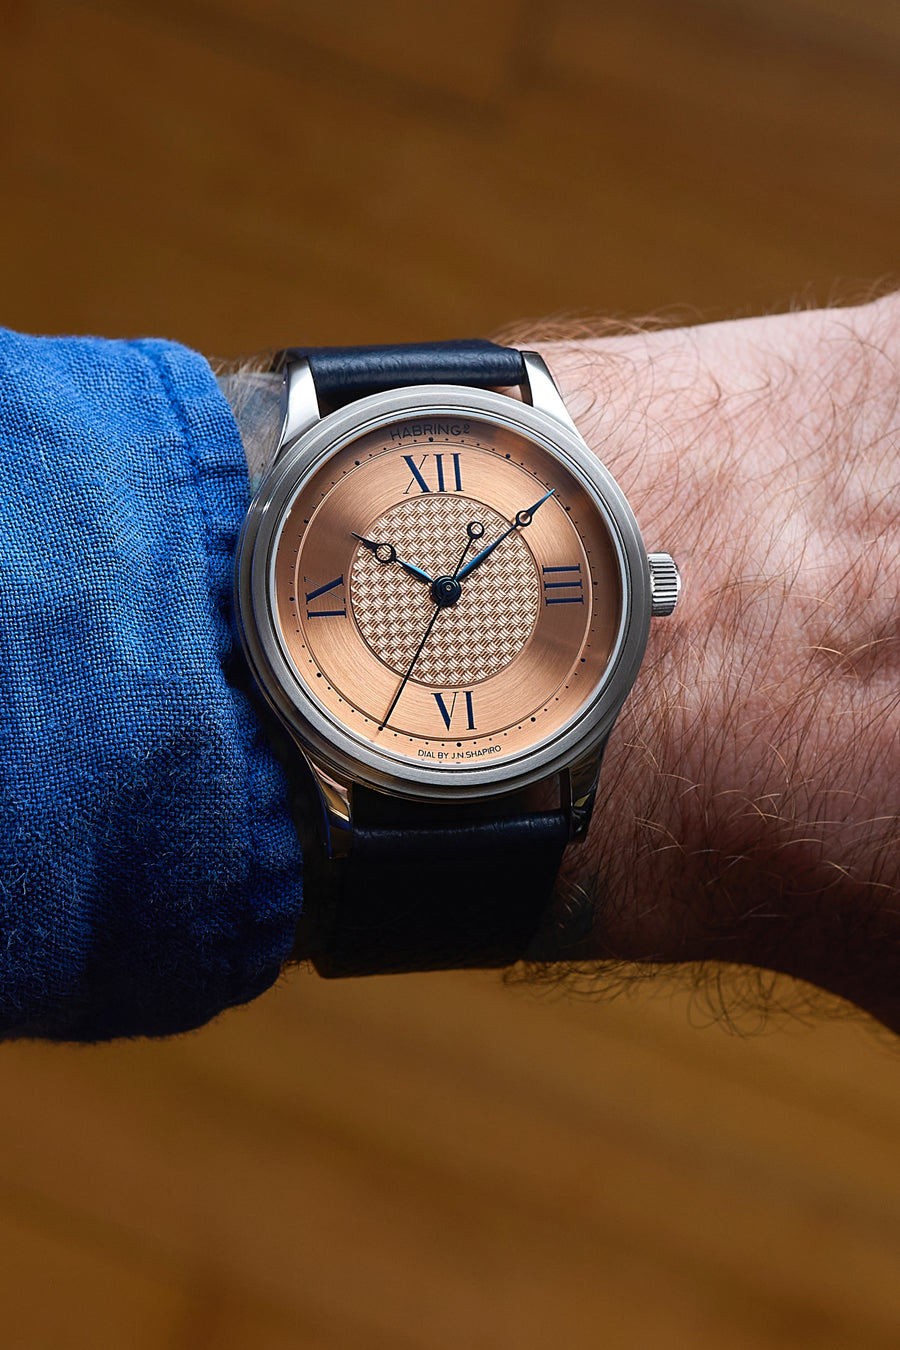 The Massena LAB x Habring² ERWIN LAB03 features a bronze guilloché dial by J.N. Shapiro.